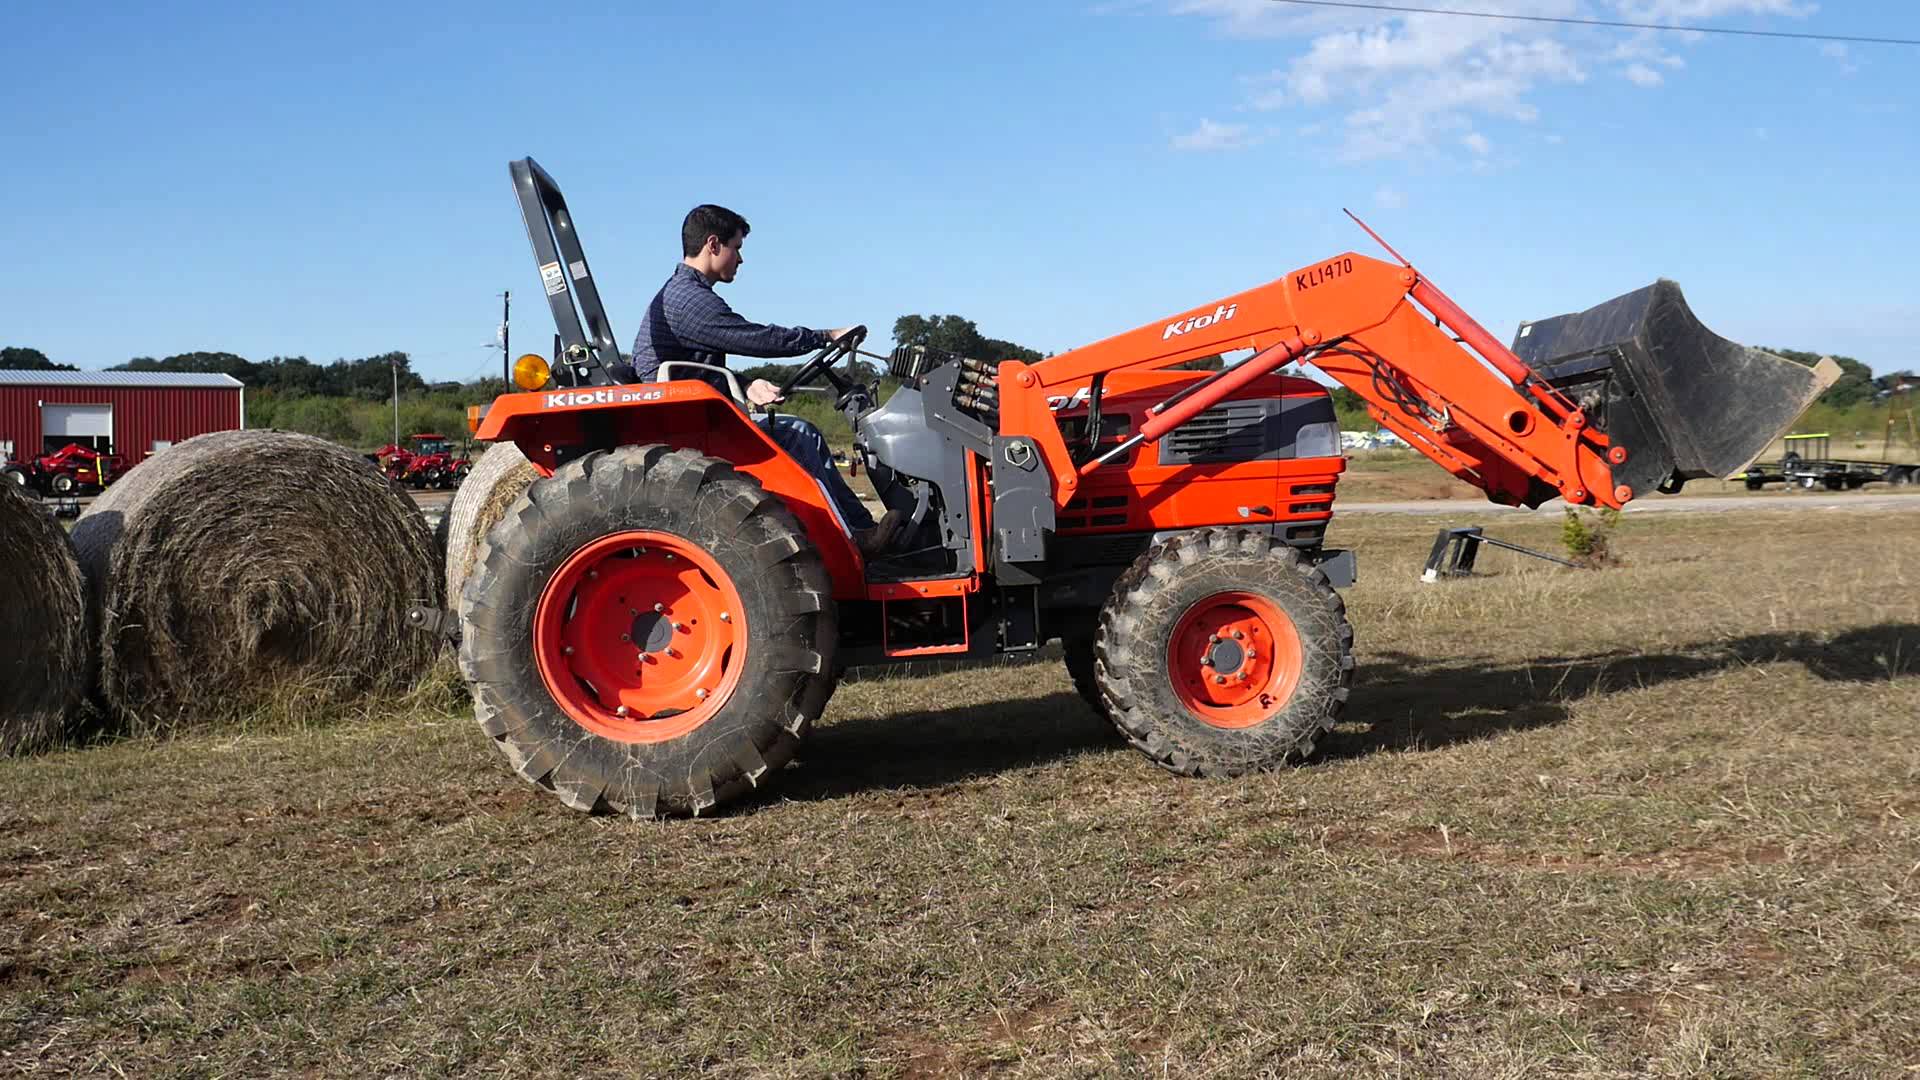 Demo Video of Used Kioti DK45 Tractor with Loader - YouTube